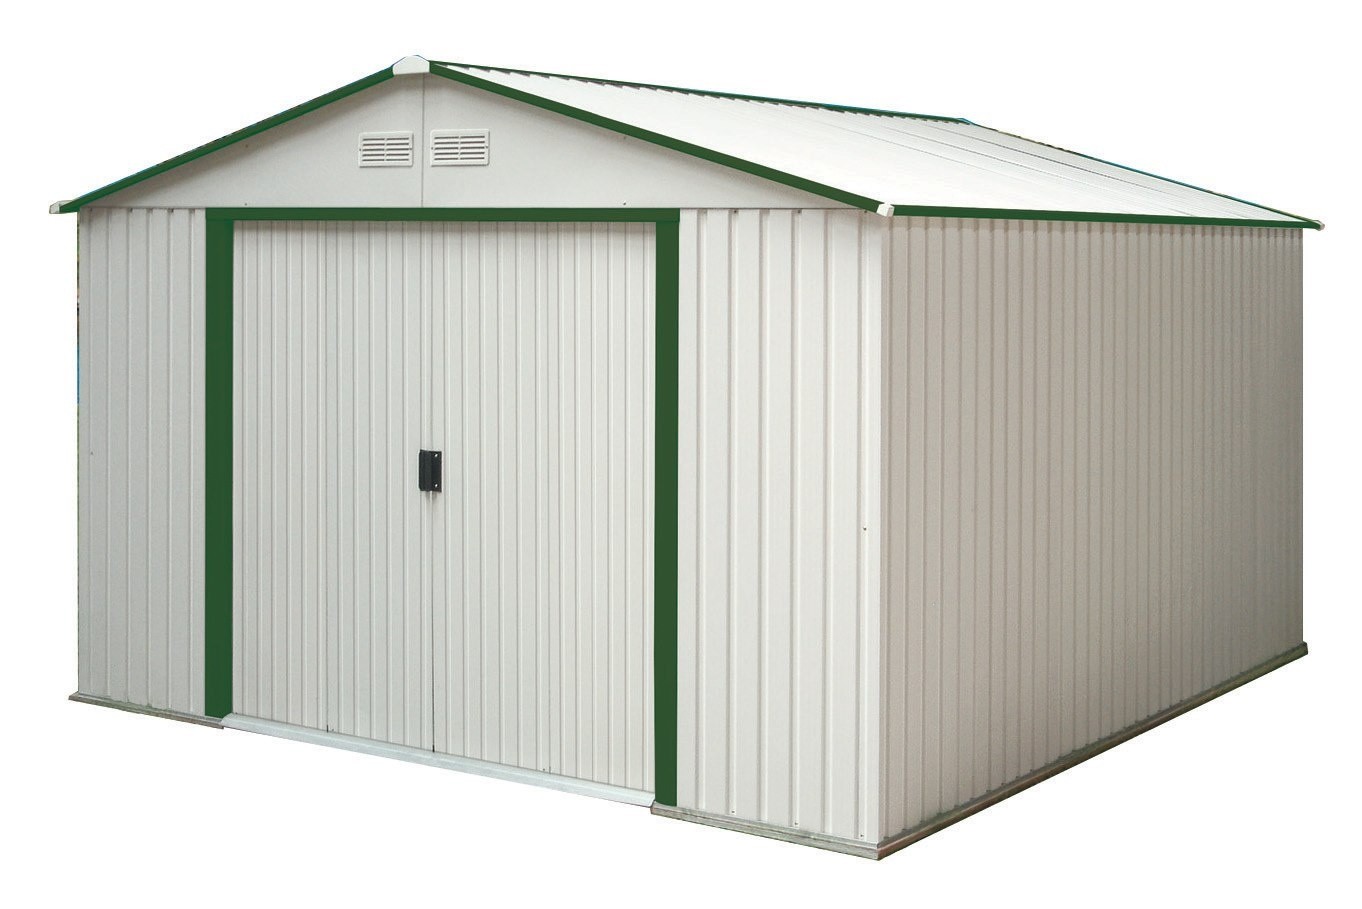 Duramax Metal Sheds - Free Shipping and Guaranteed Low Prices on all 